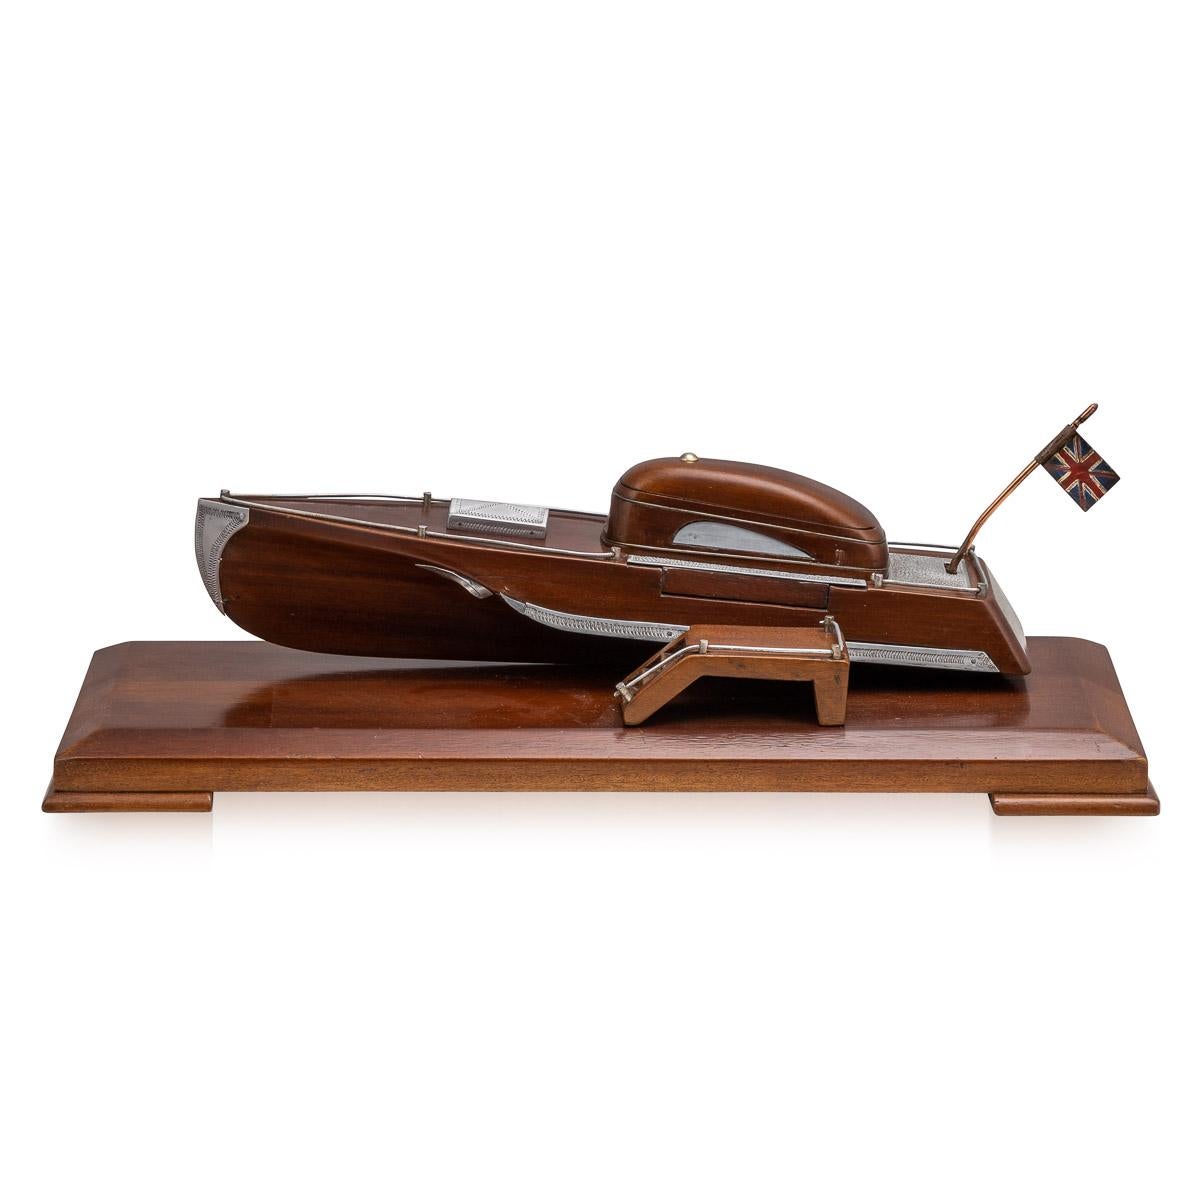 Antique 20th century English mahogany novelty cigarette dispenser, in the form of a motor speed boat, cleverly dispenses the cigarette by pushing the Union Jack flag, a platform for the cigarette to fall on to, in the form of a boarding step,